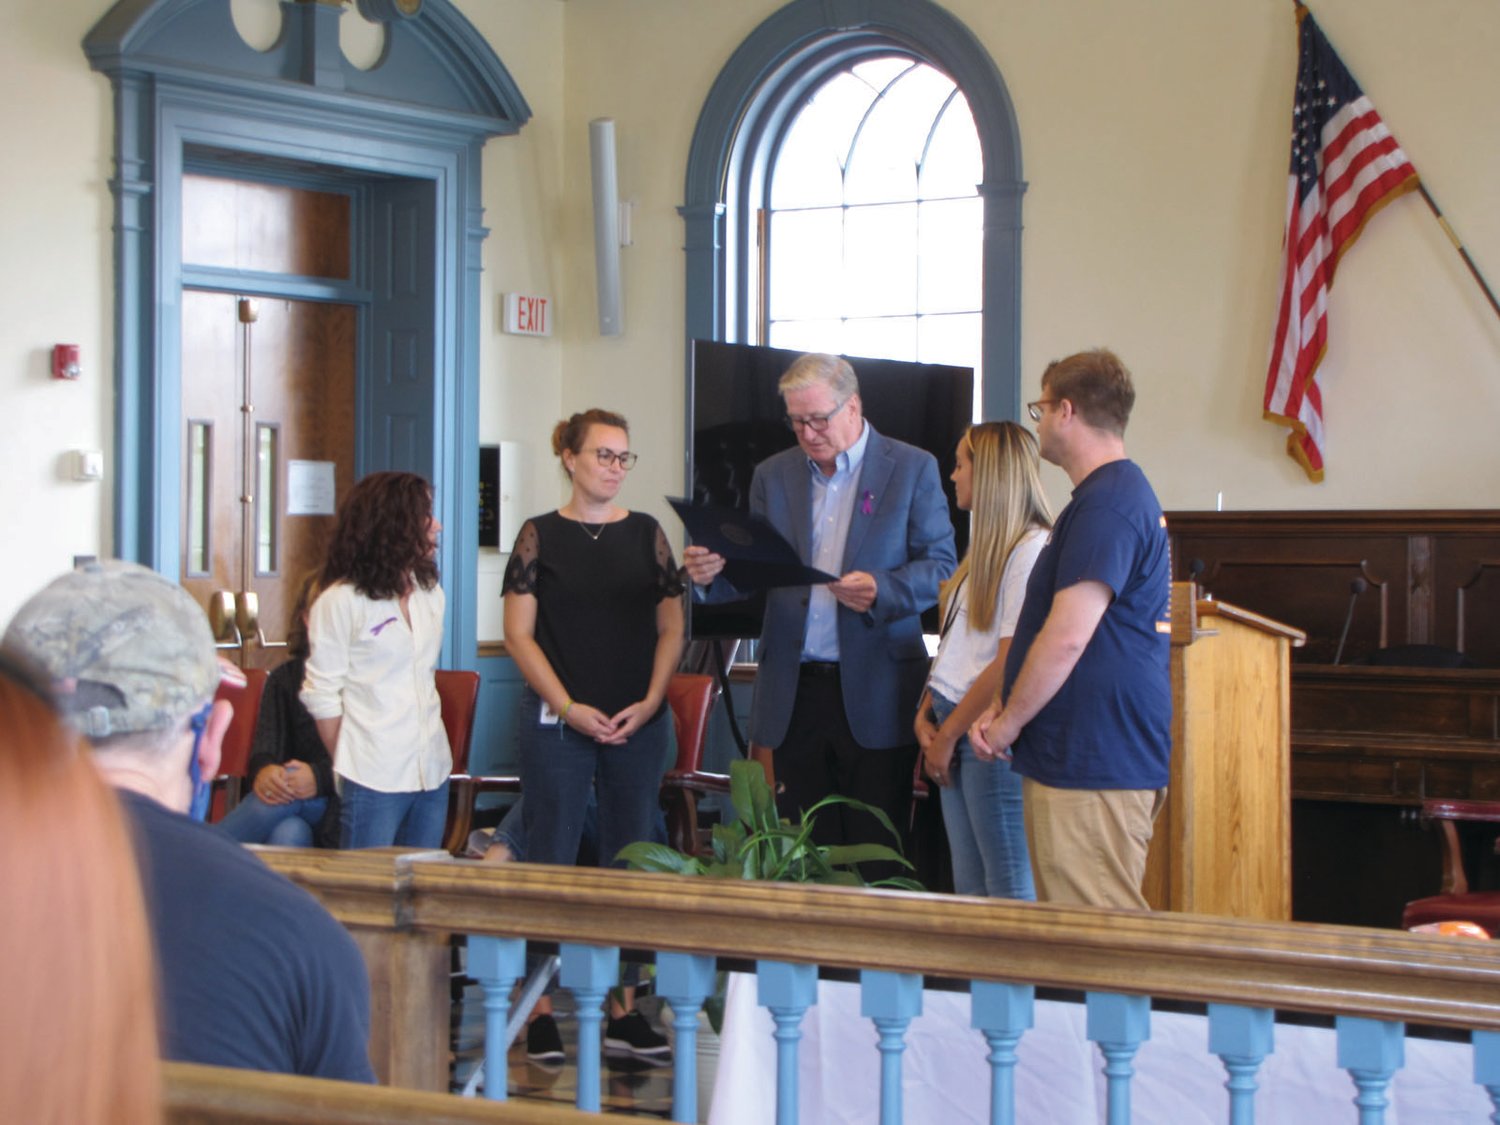 FROM THE CITY:  Mayor Ken Hopkins presents a citation from the city to representatives of Anchor Recovery during last week’s Recovery Month event.